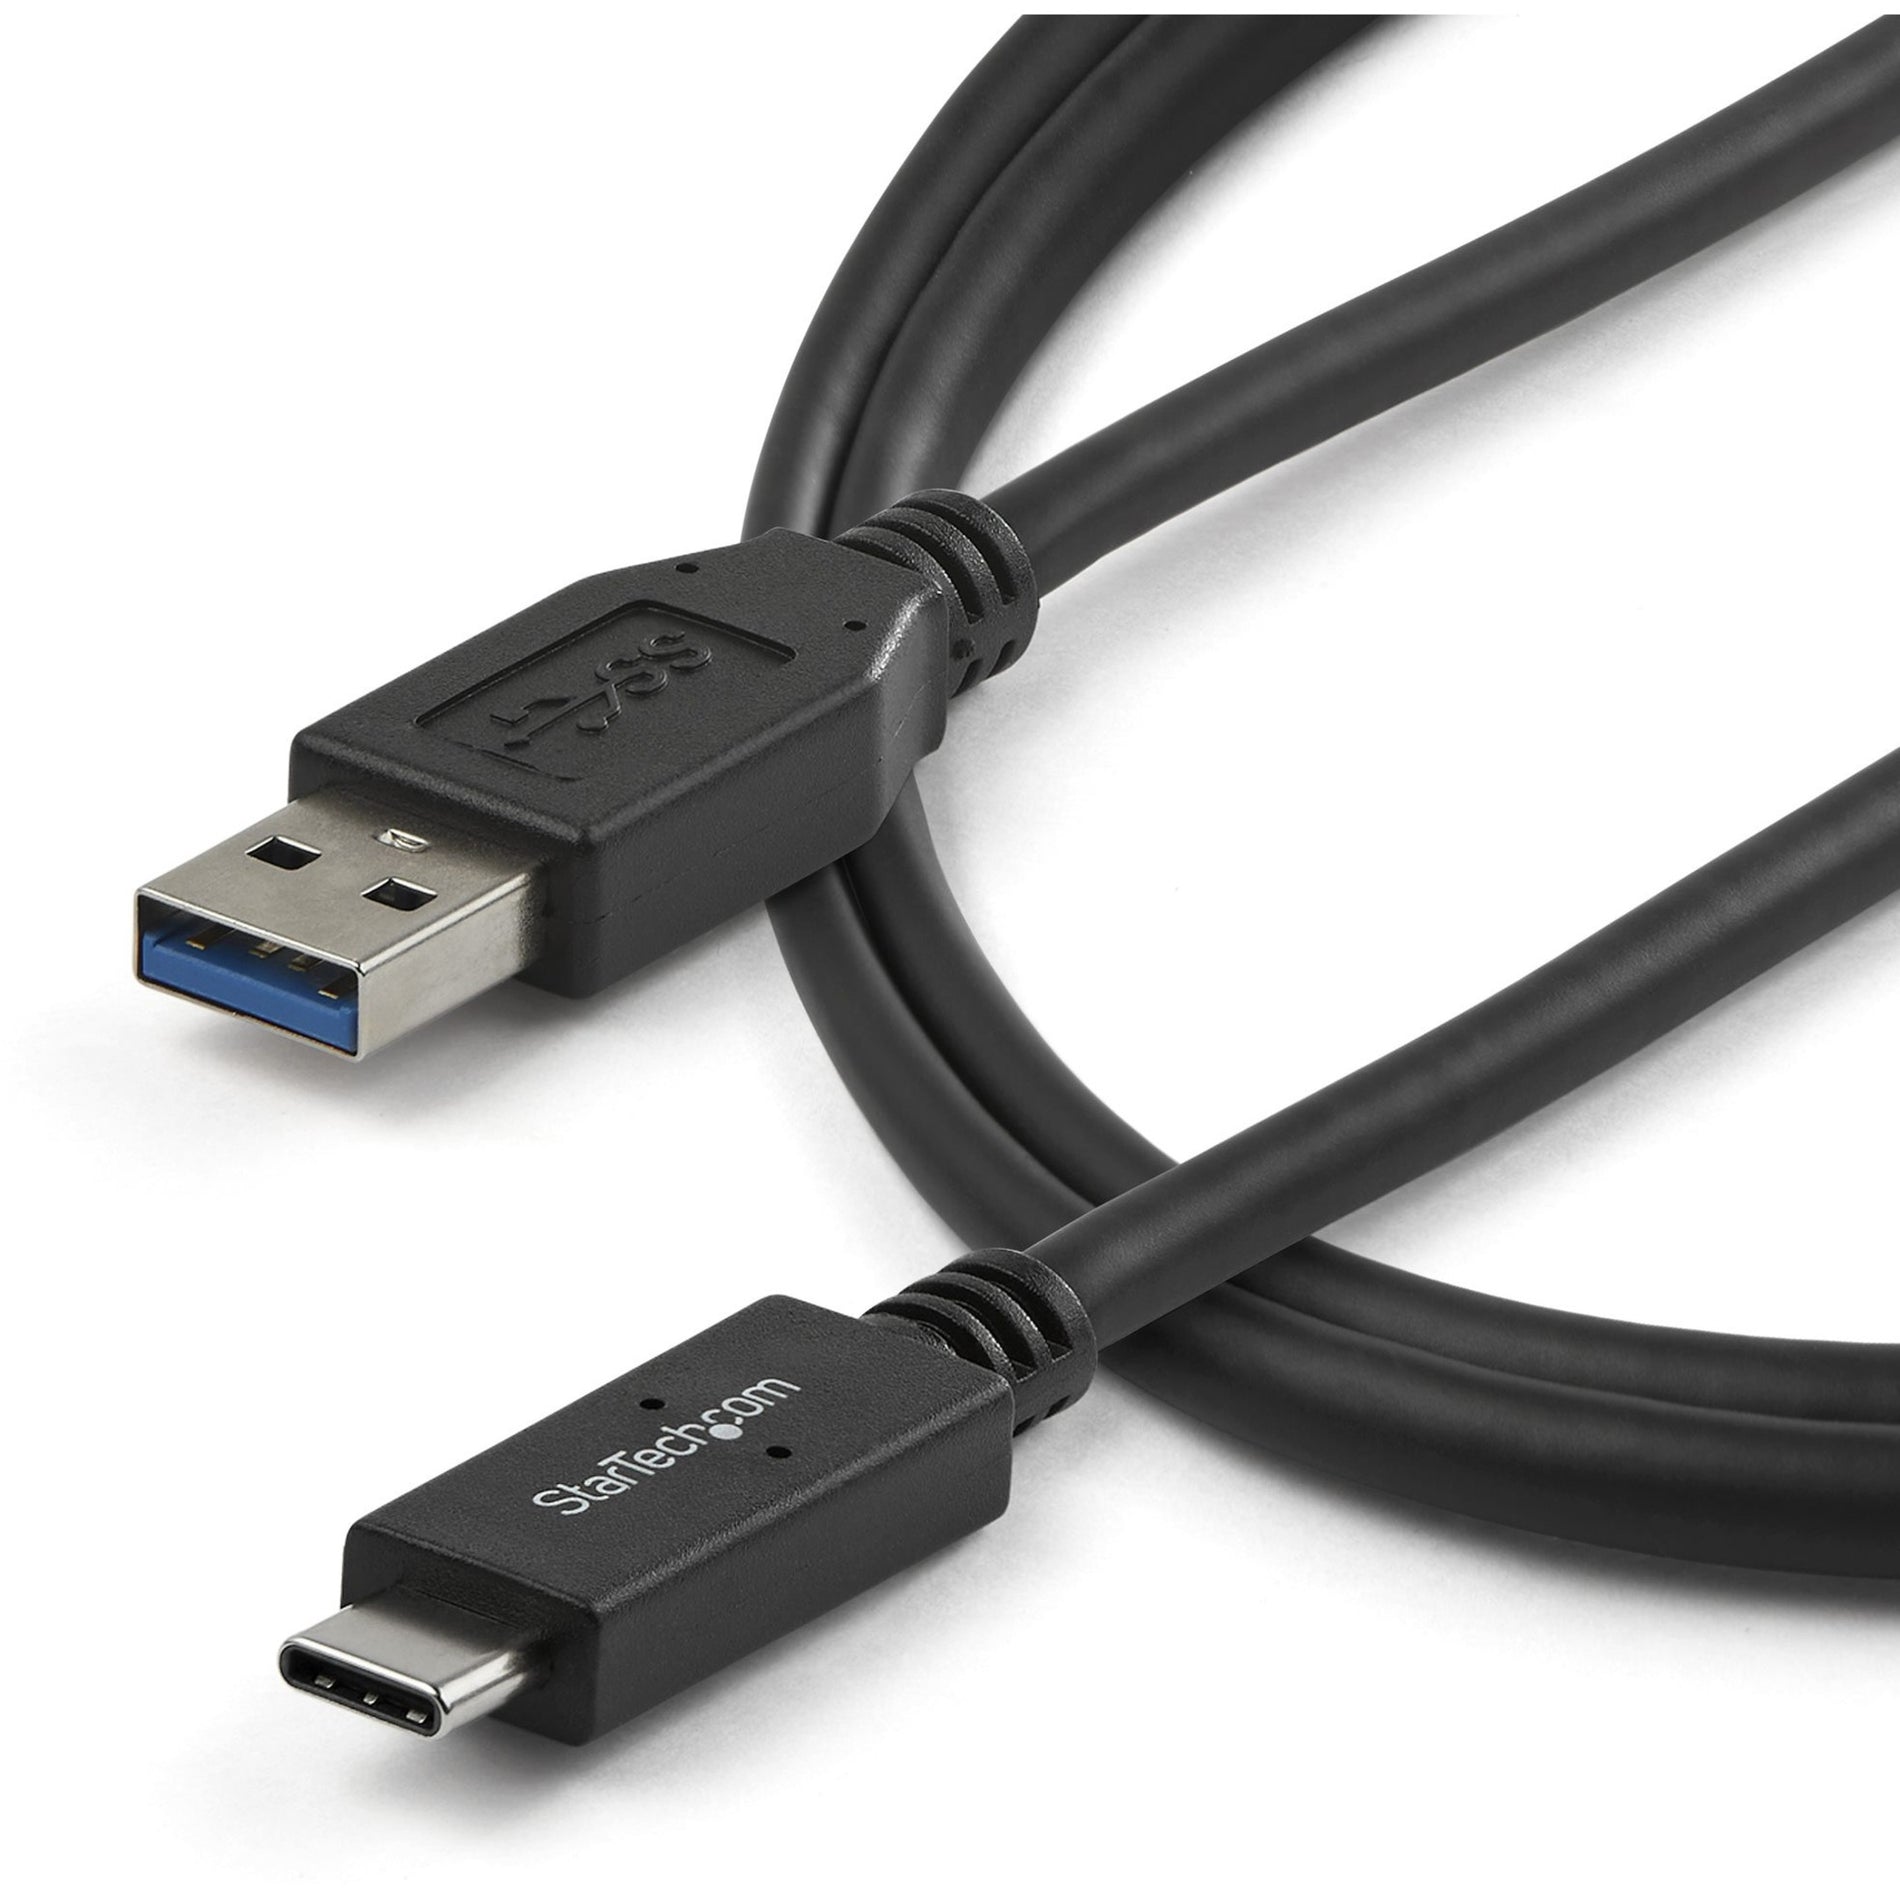 StarTech.com USB31AC1M 1m USB-C to USB-A Cable, USB 3.1 Gen 2 10Gbps Data Transfer Cable